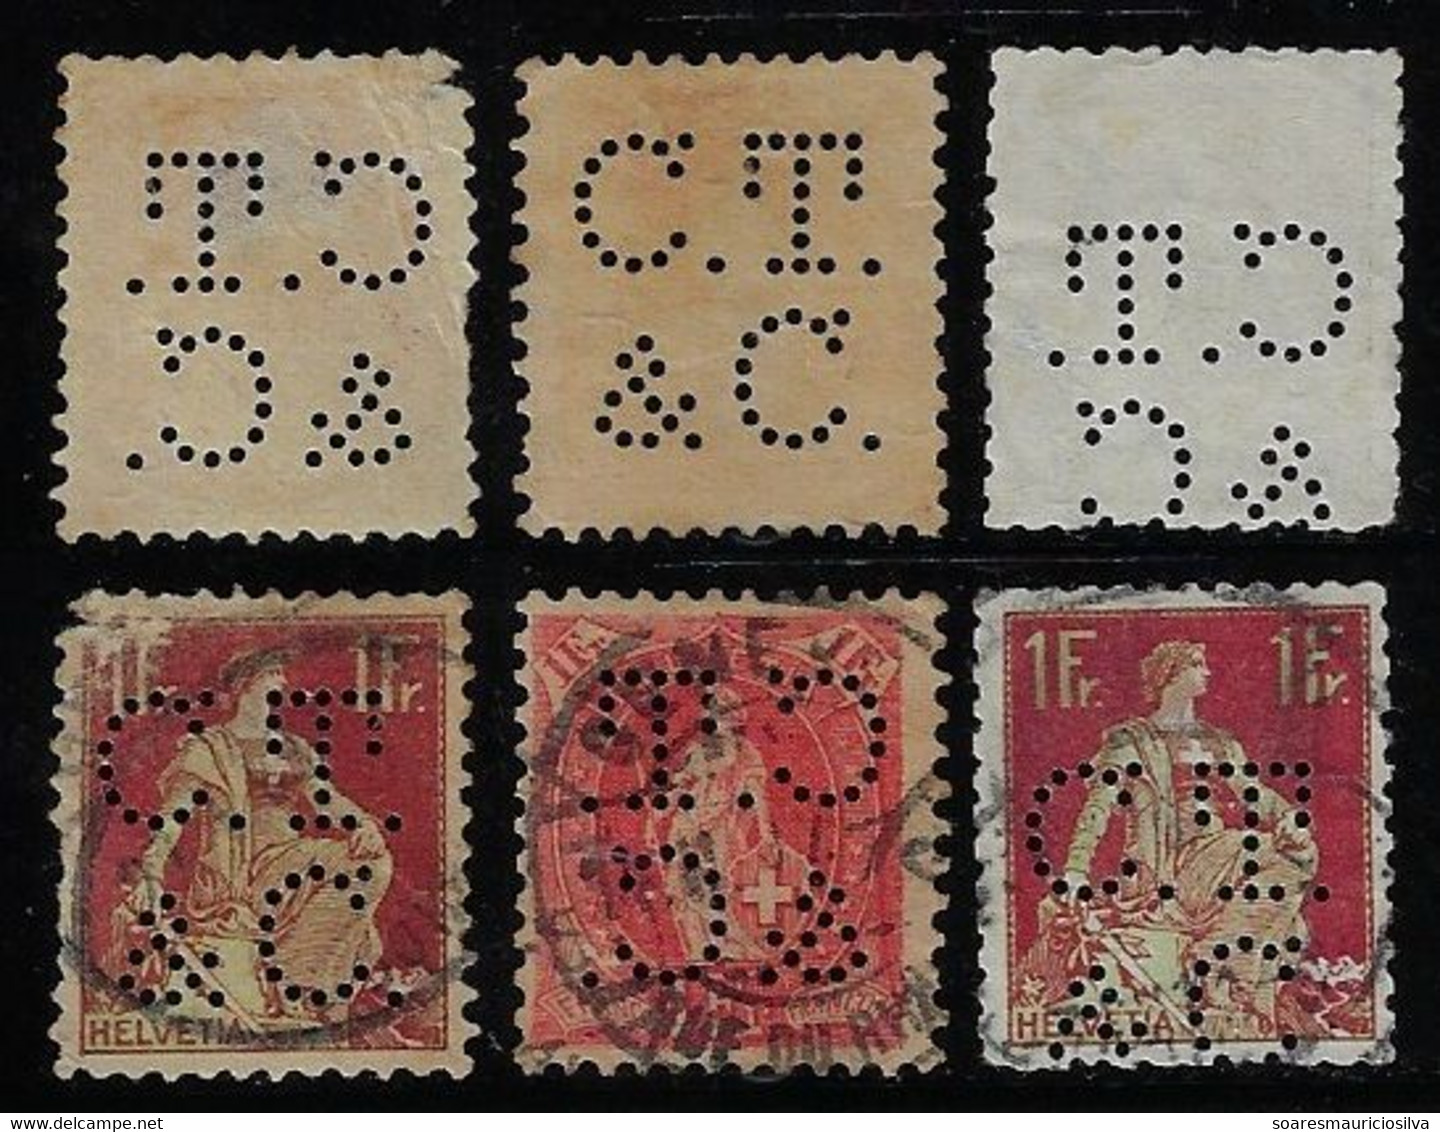 Switzerland 1902 / 1934 3 Stamp With Perfin C.T./&C. By Clement Tournier & Cie SA From Geneva Lochung Perfore - Perforadas